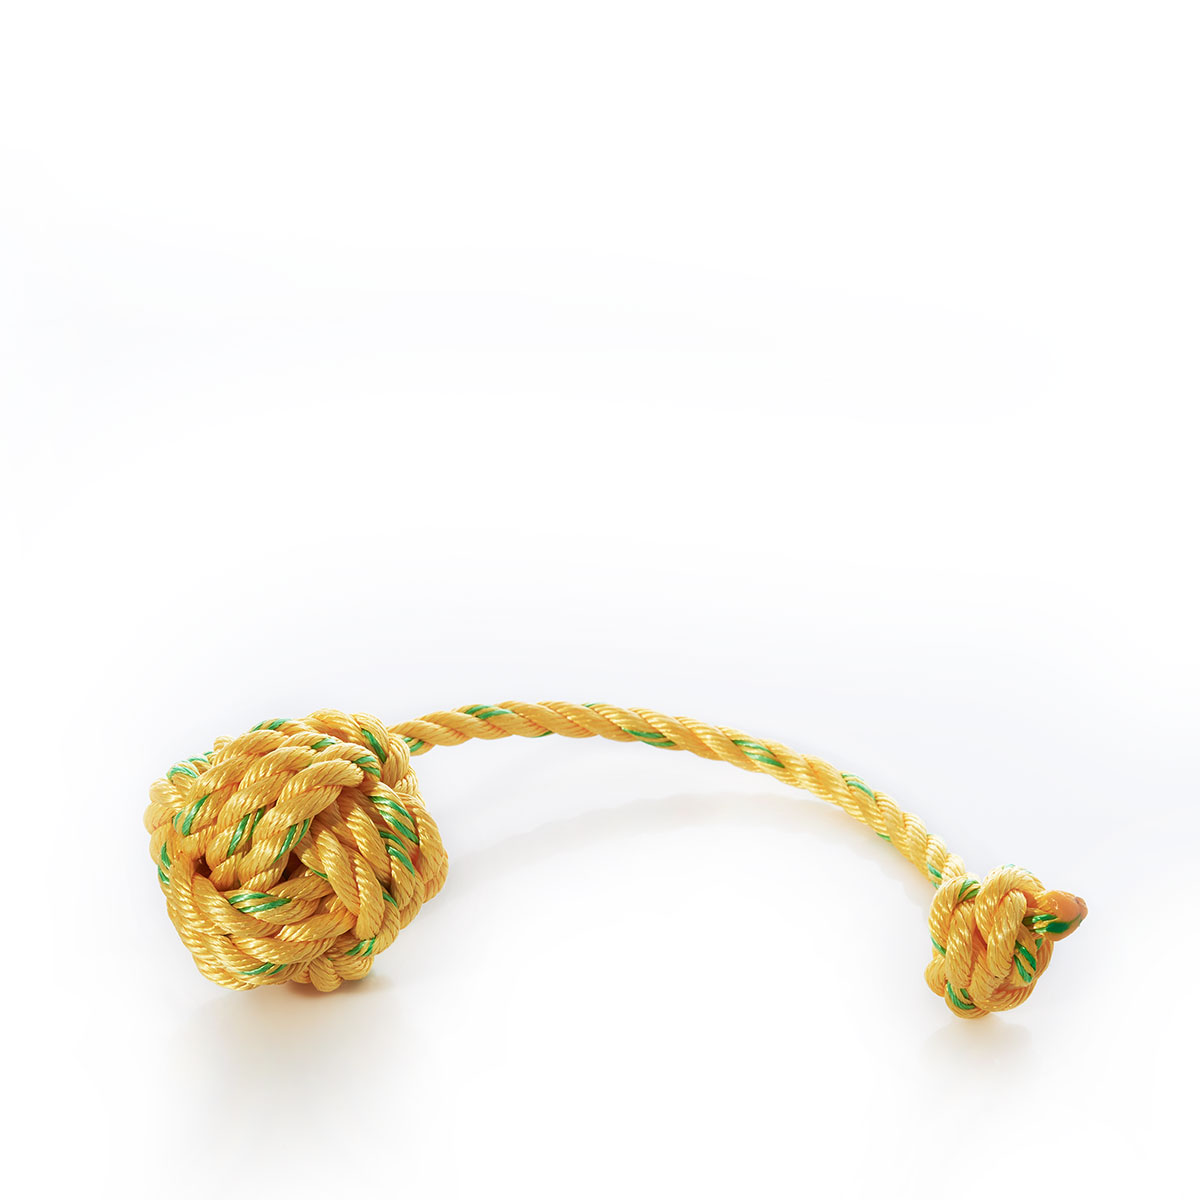 handmade rope dog toy with monkeys fist large knot on one end and small knot on other end